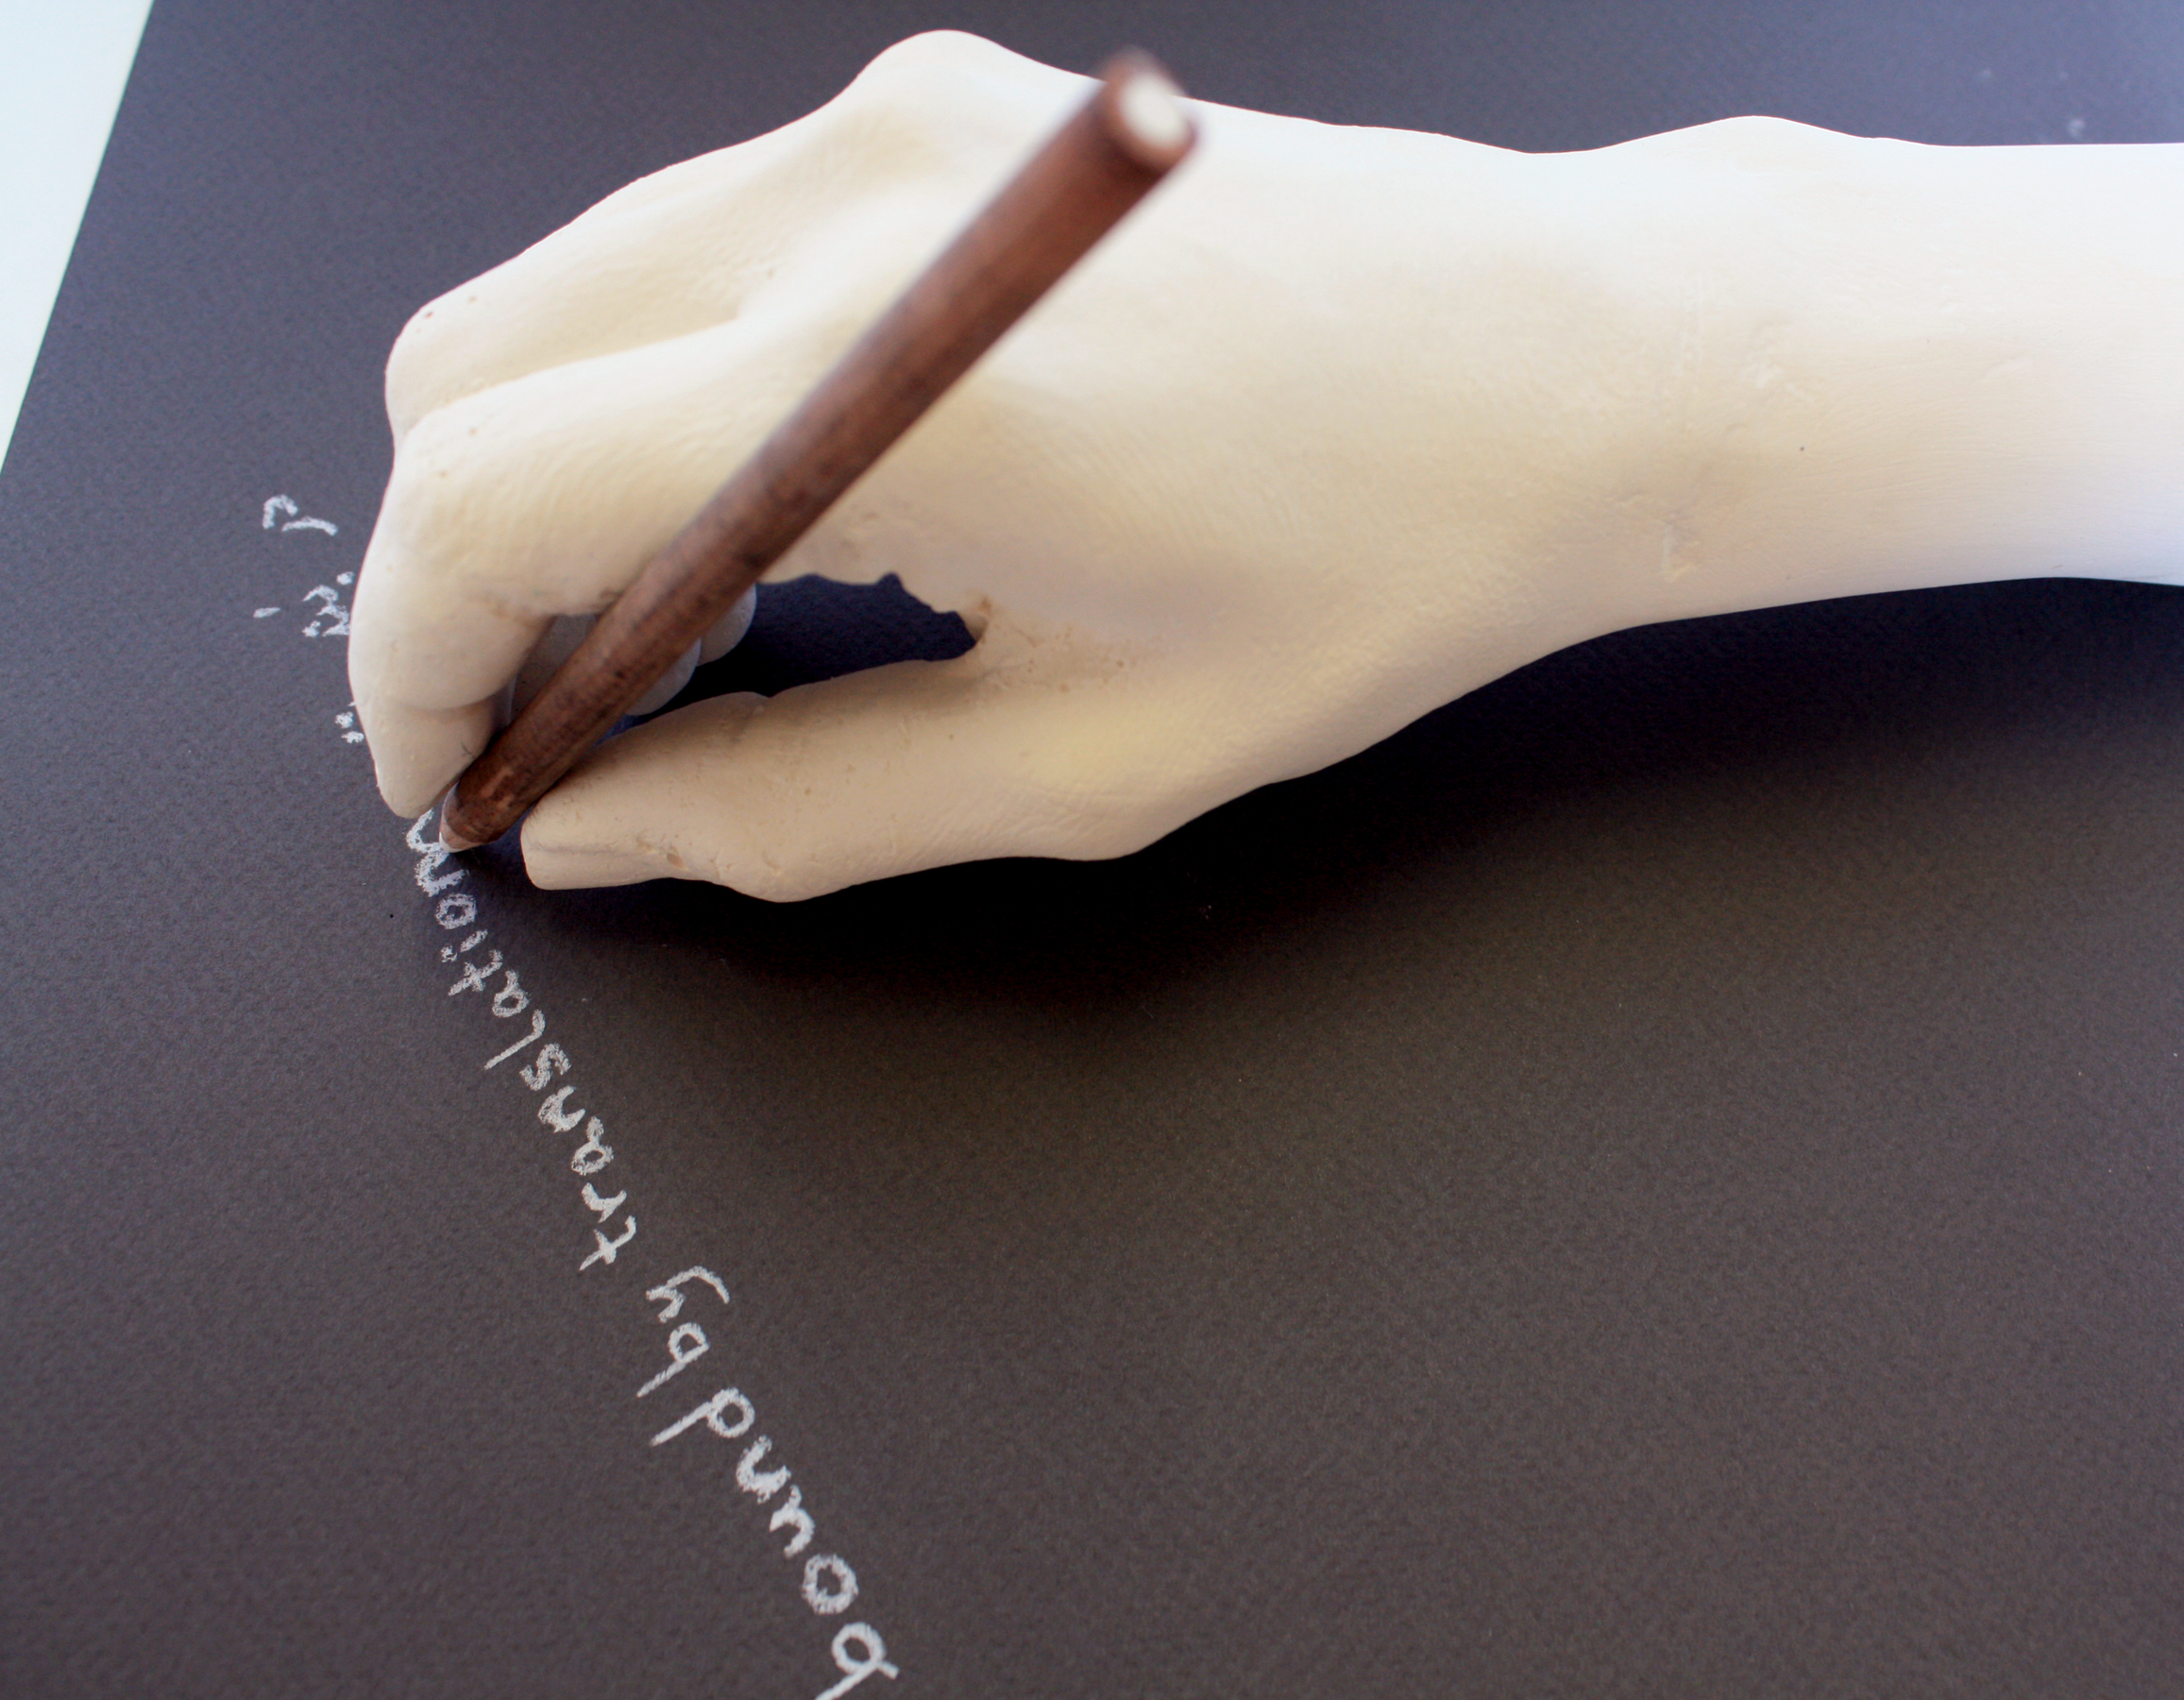  Bound in translation, 2015  Plaster cast, pencil and paper, variable dimension 